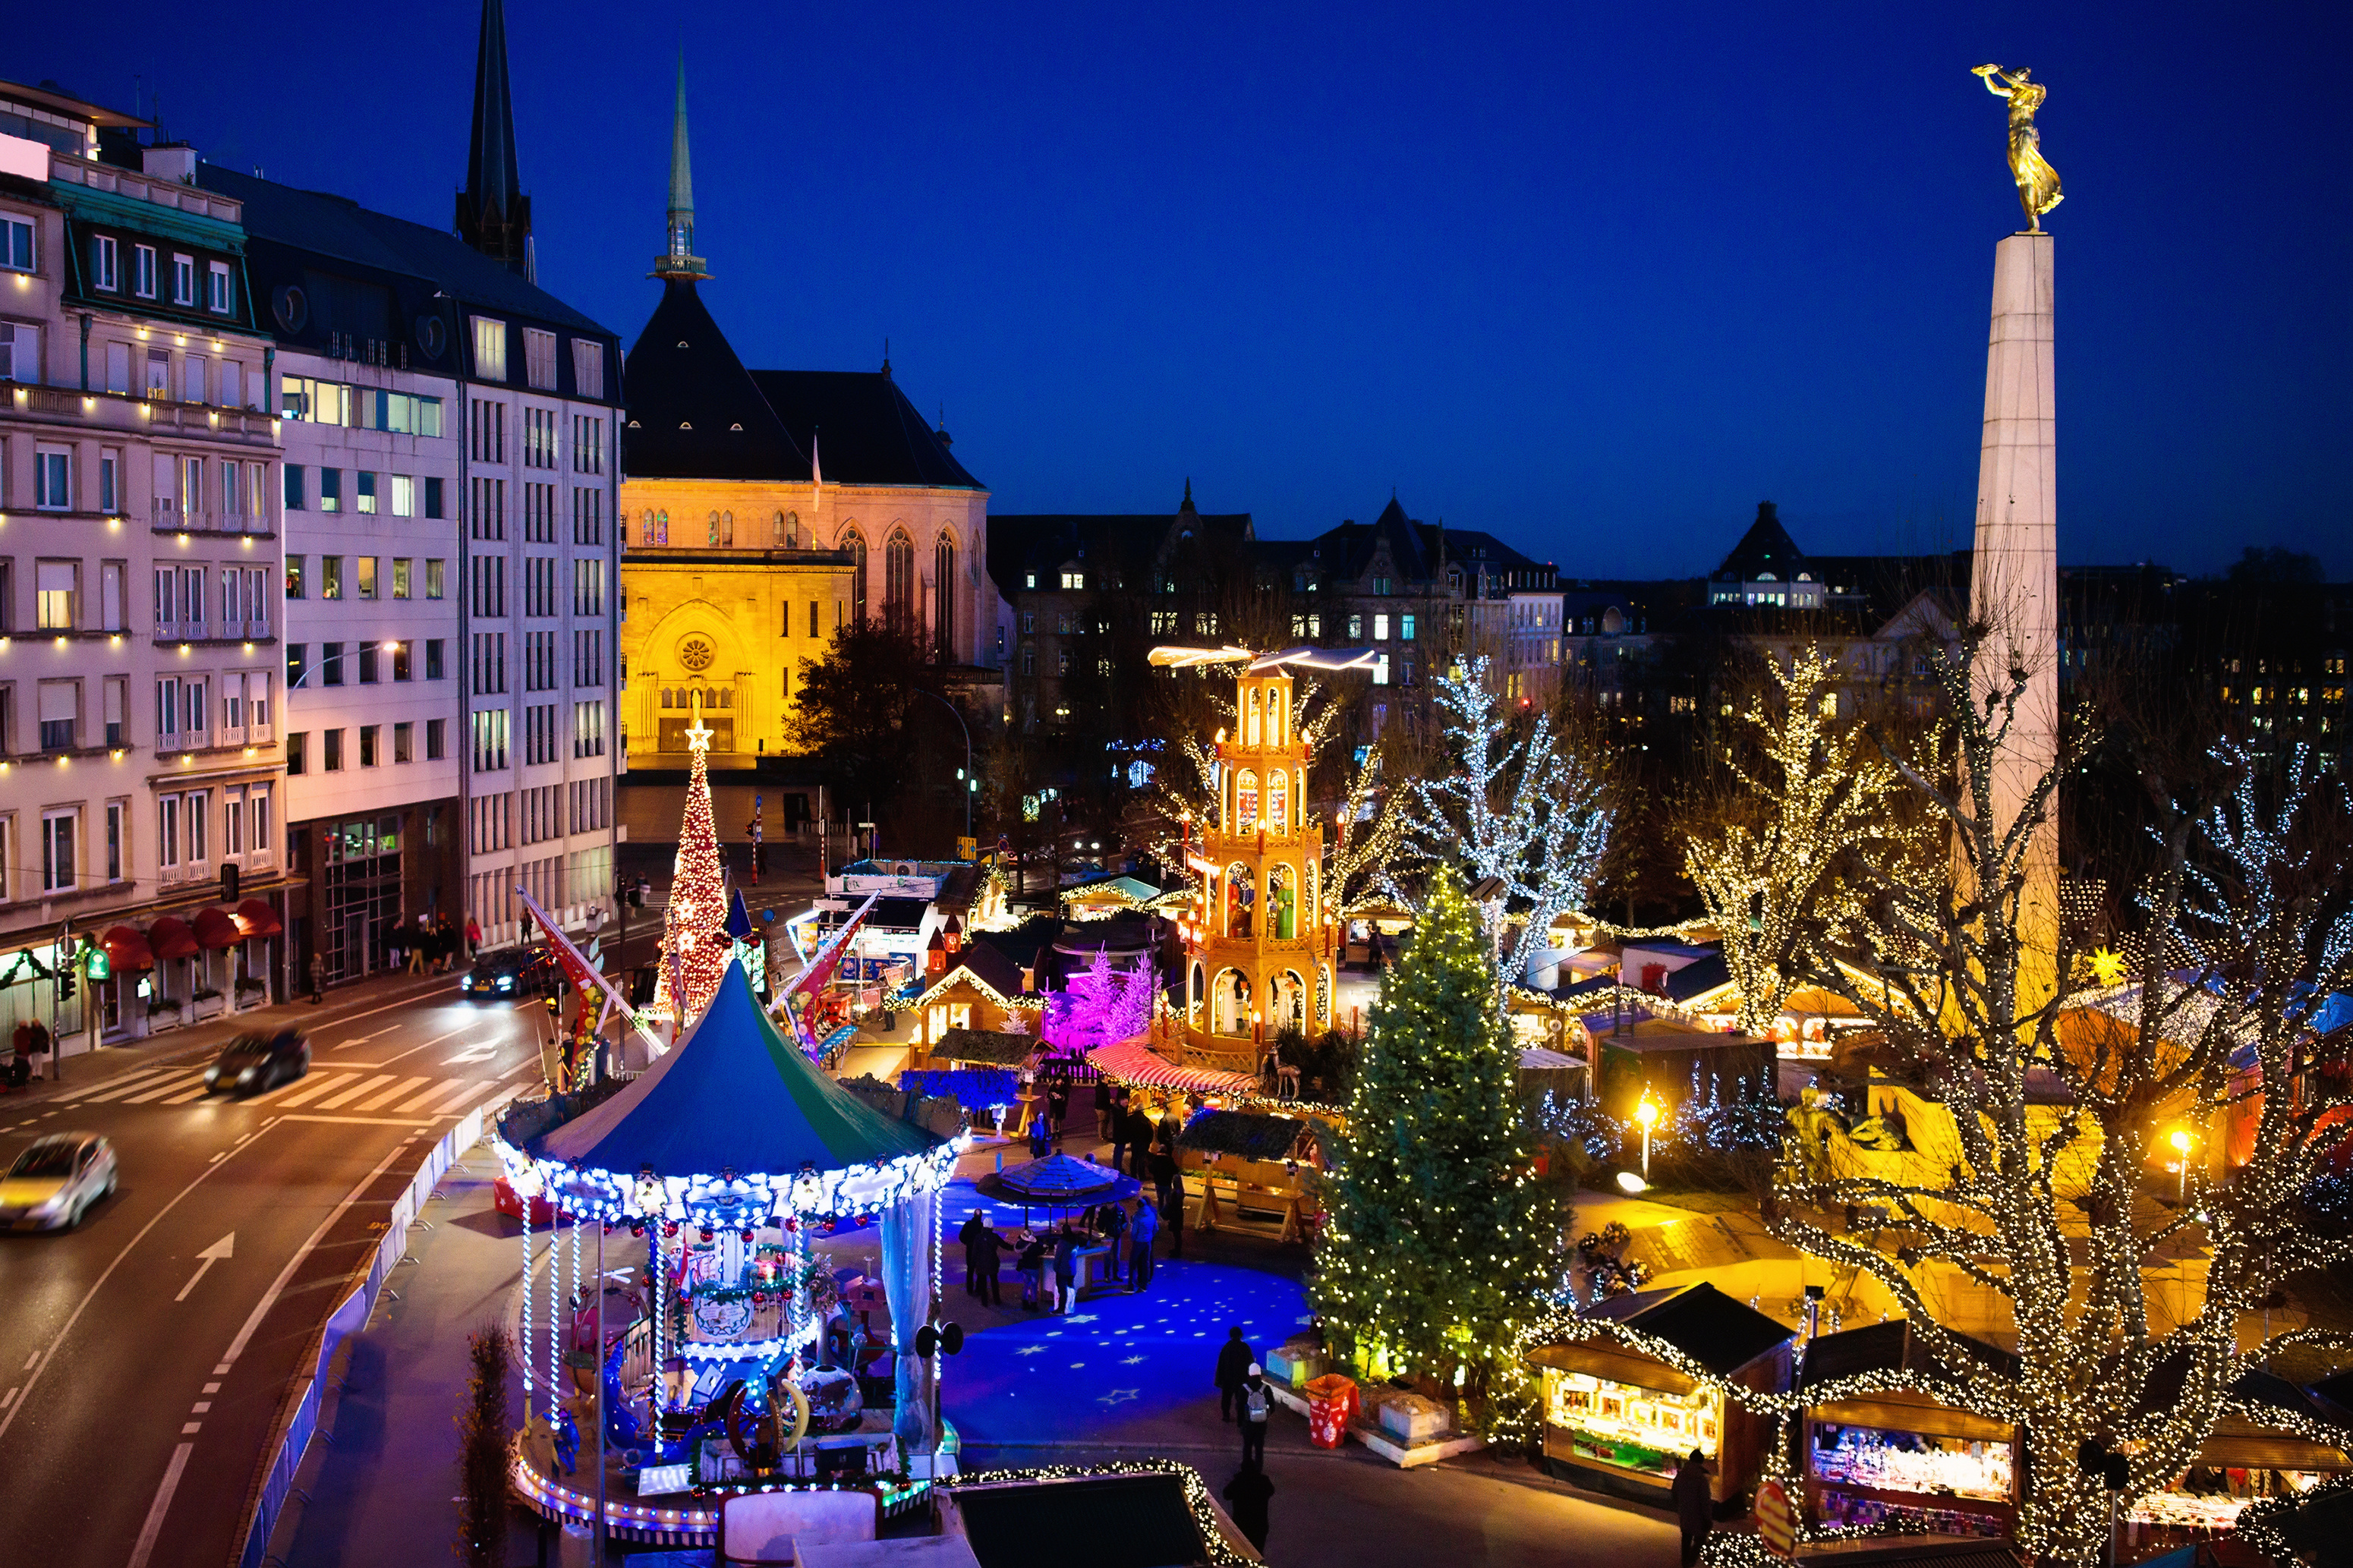 10 of the charming Christmas markets in Europe